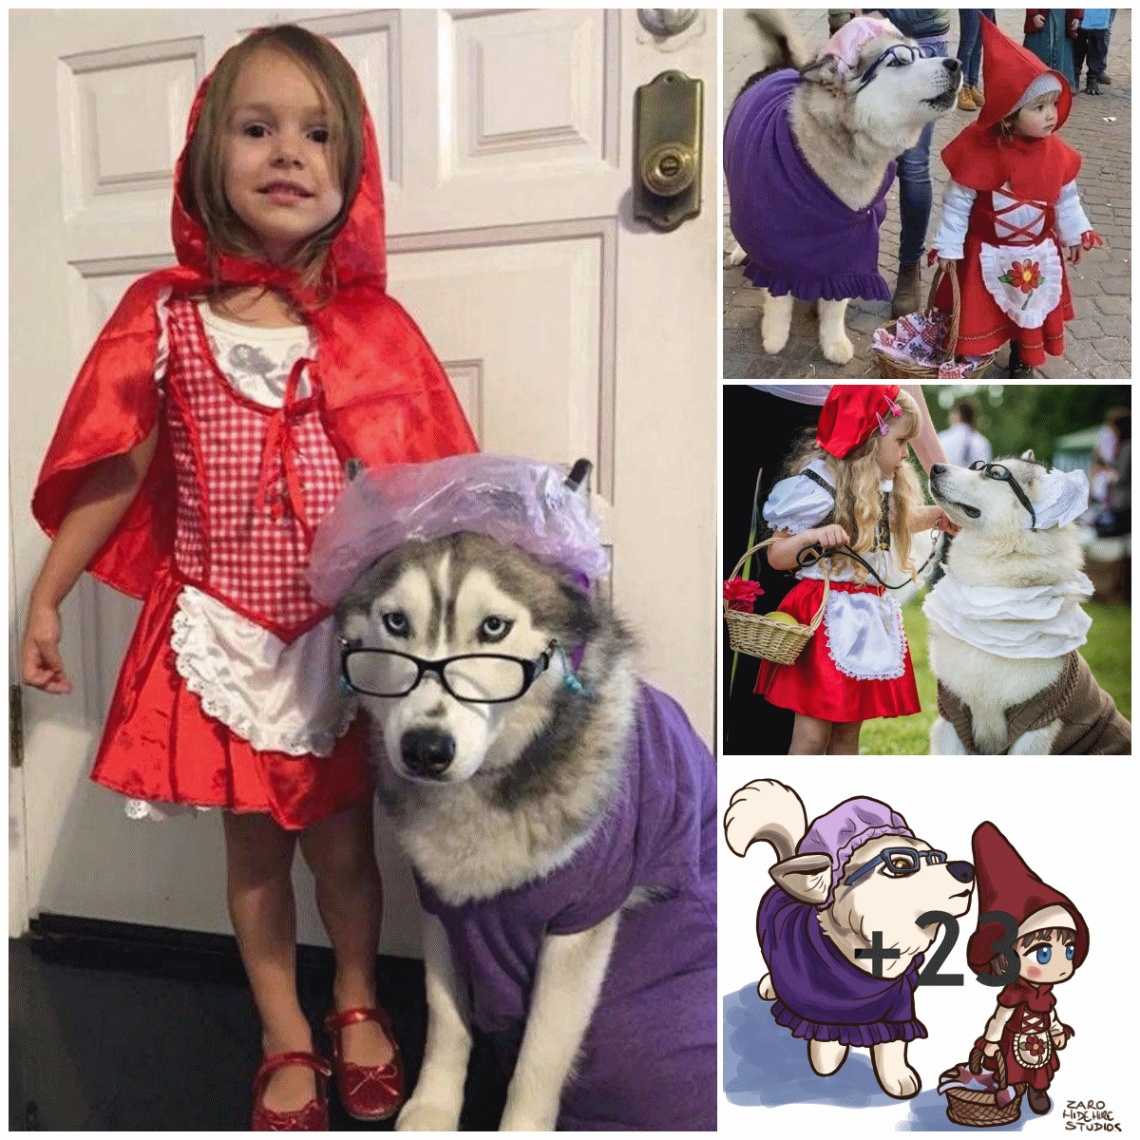 The makeup of Little Red Riding Hood and the Husky “wolf” was so adorable that it created a frenzy in the online community.